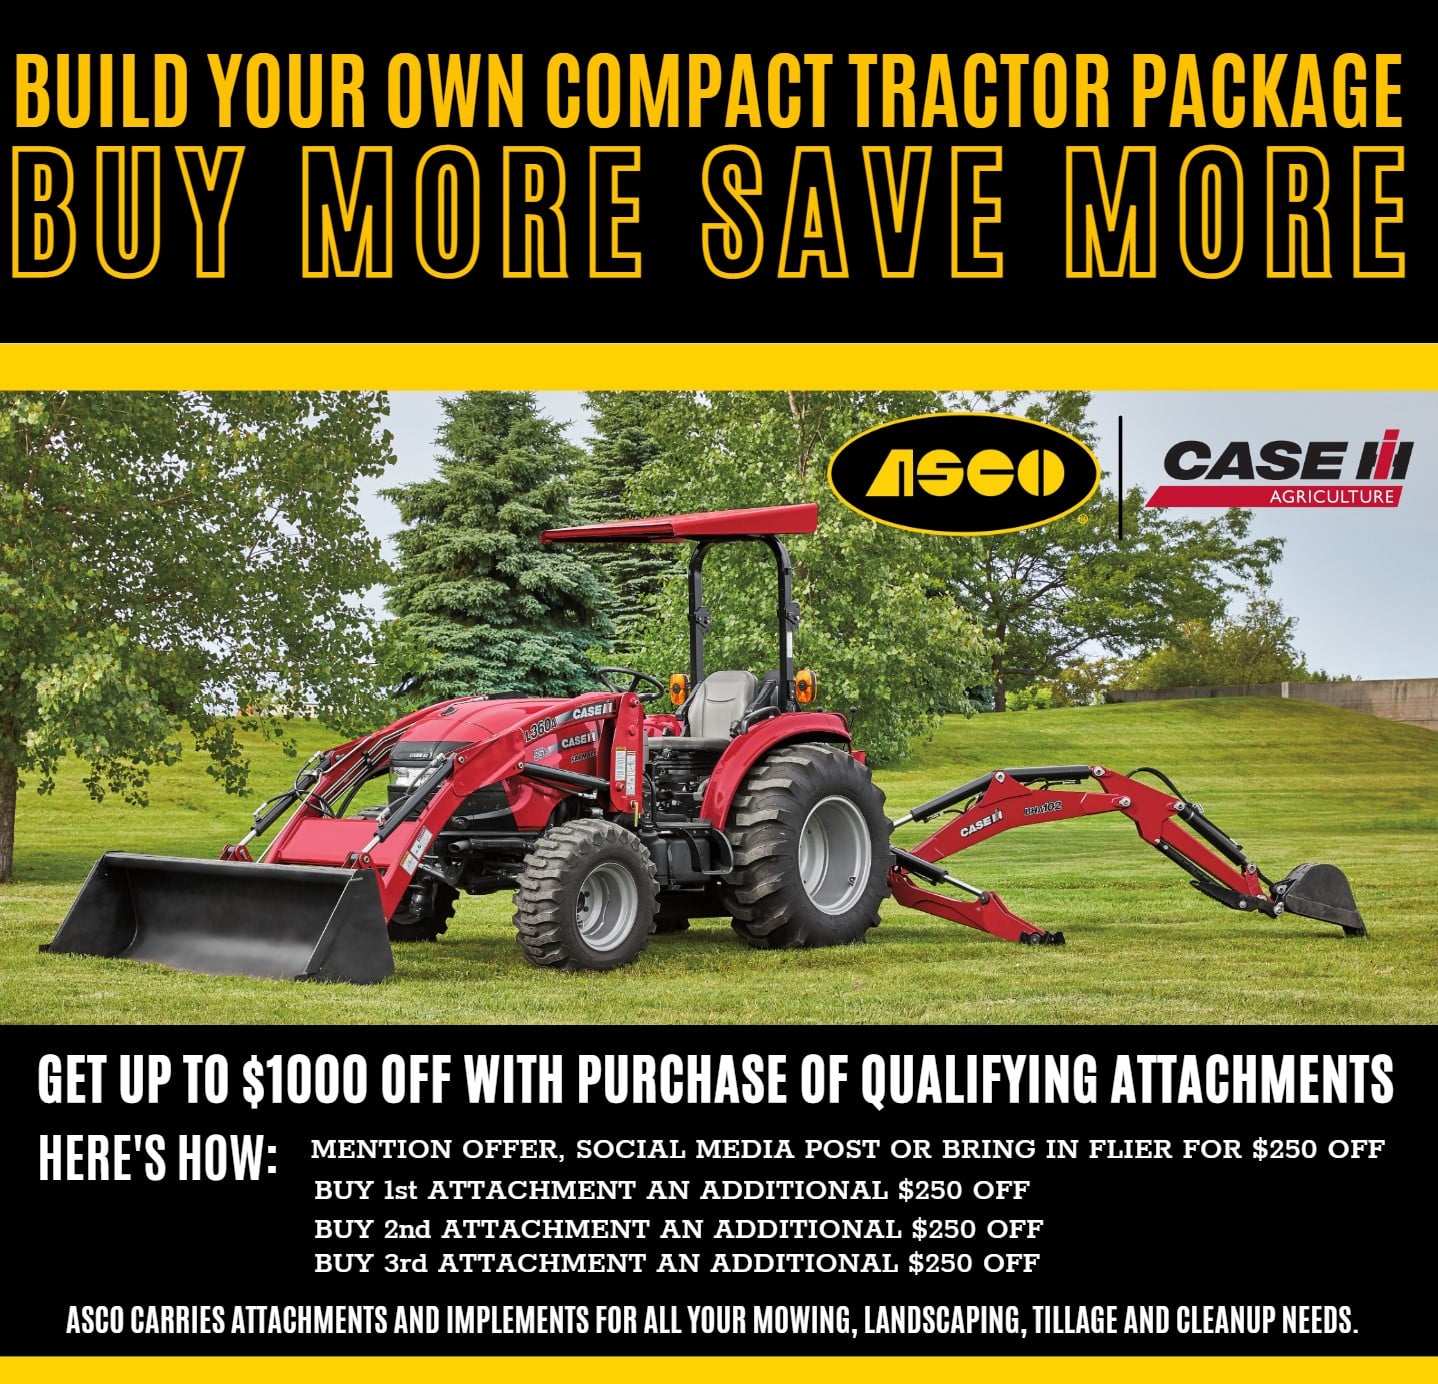 CASE IH Compact Tractor Package